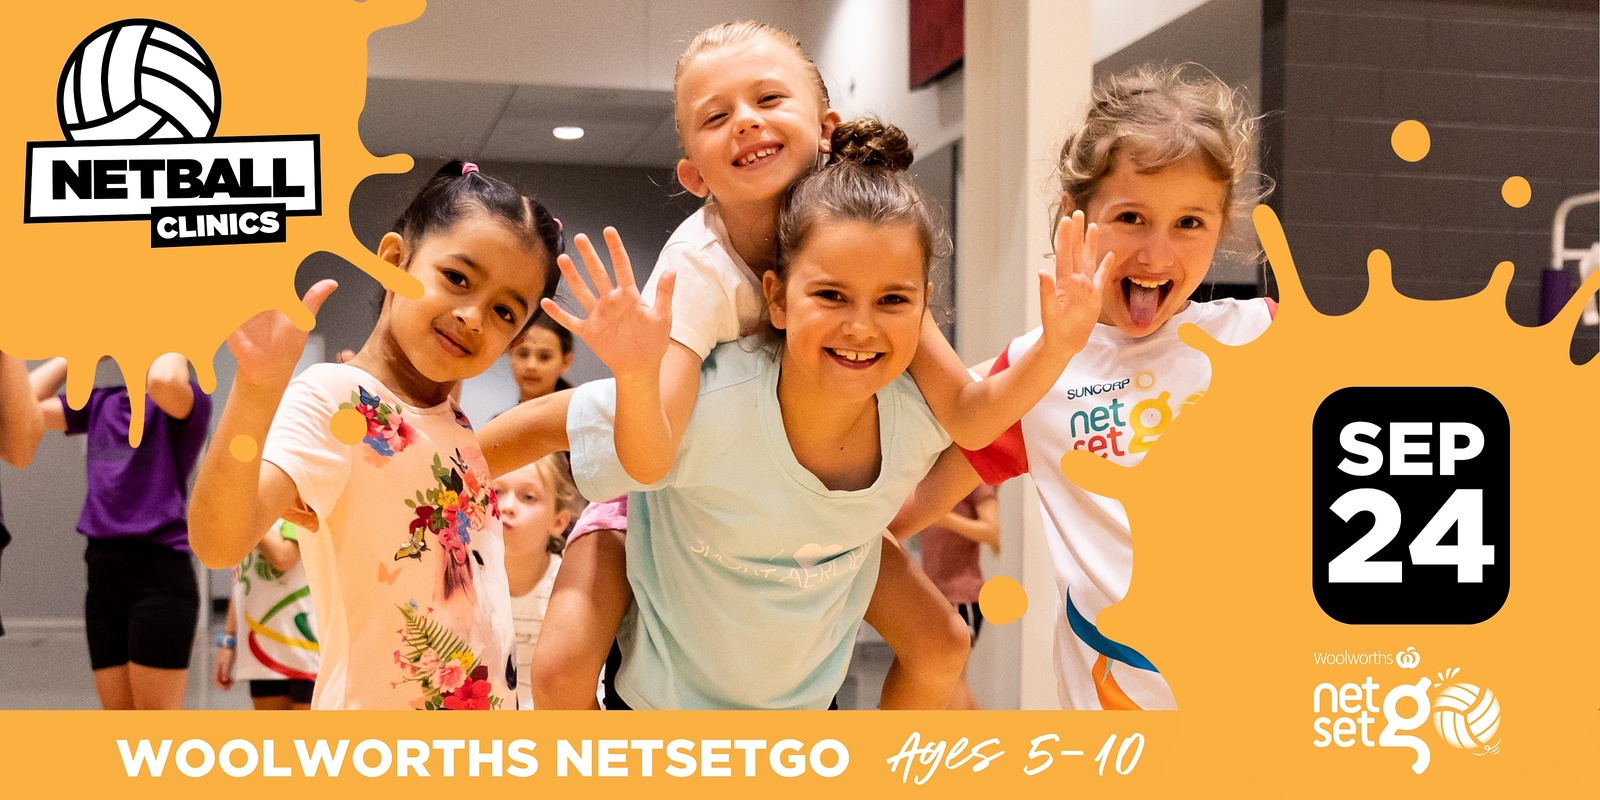 Banner image for WOOLWORTHS NETSETGO CLINIC (24 SEP) - NISSAN ARENA - AGES 5 - 10